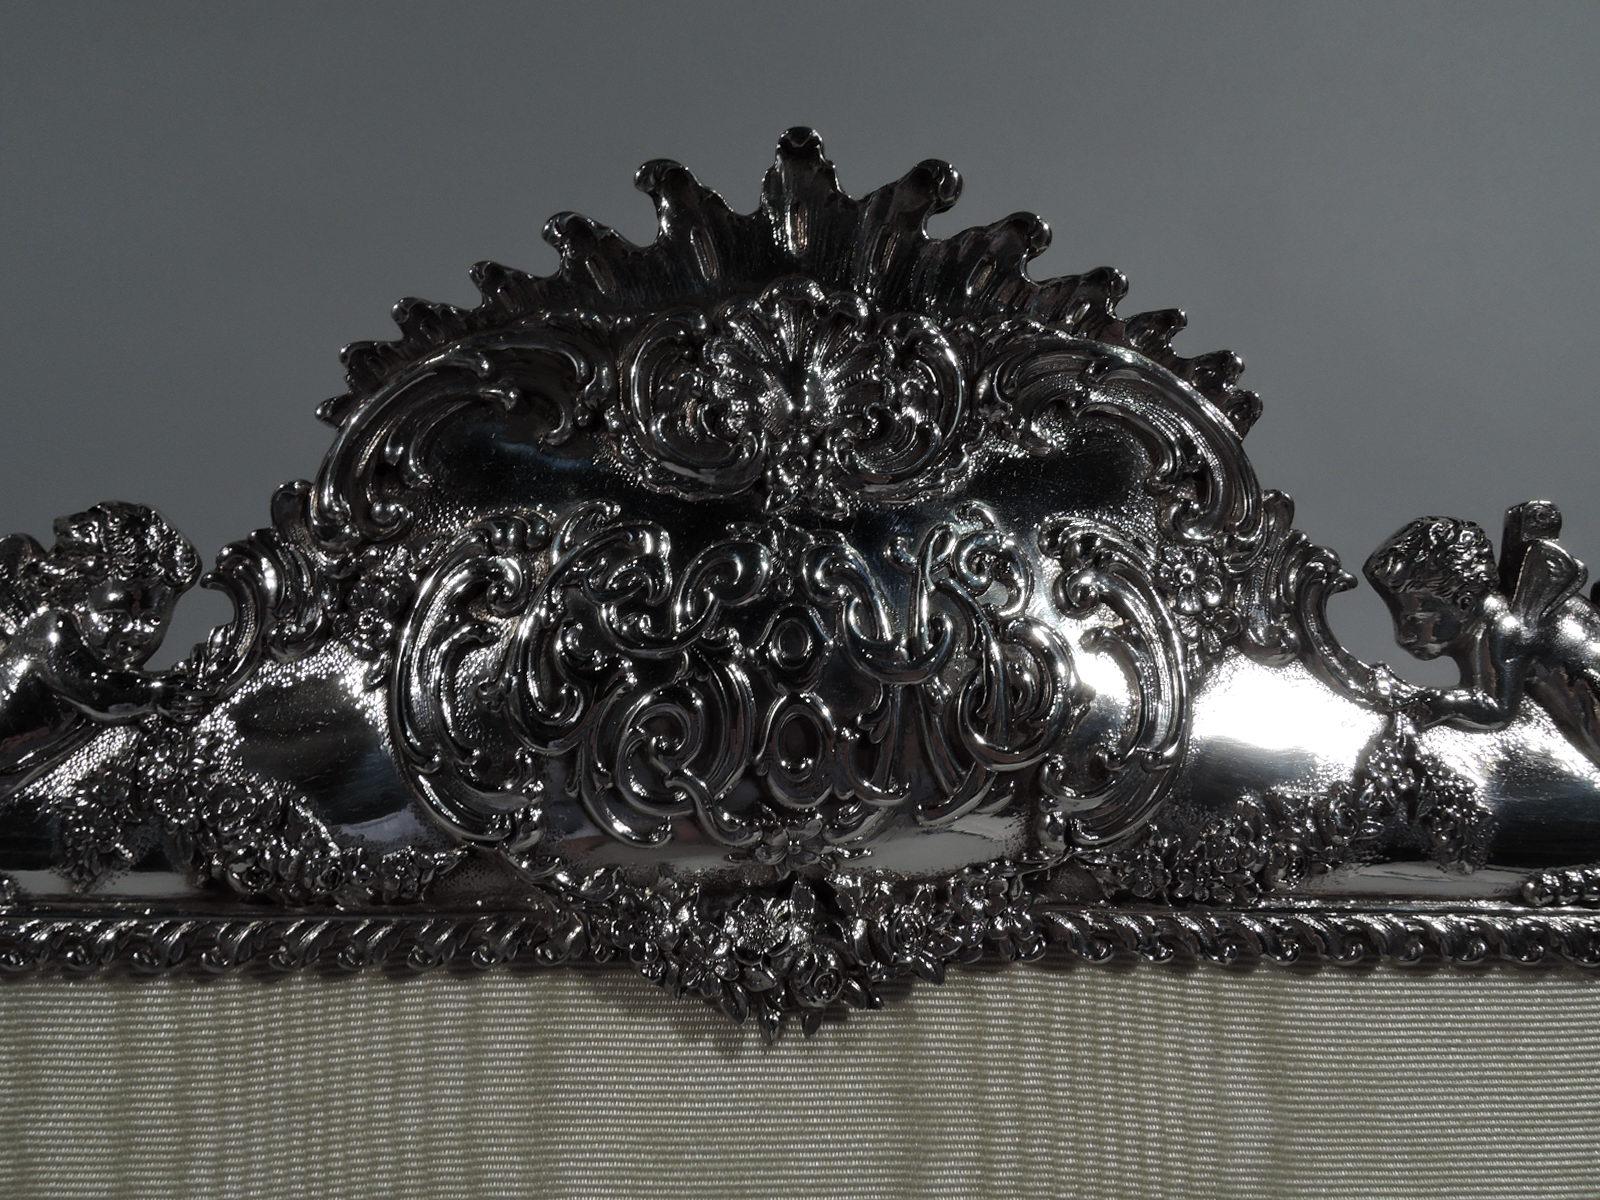 Turn-of-the-century Rococo sterling silver picture frame. Made by Tiffany & Co. in New York. Rectangular window and shaped ornate surround with bracket supports. At top are crown and corners with shell fans, winged putti supporting a garland that